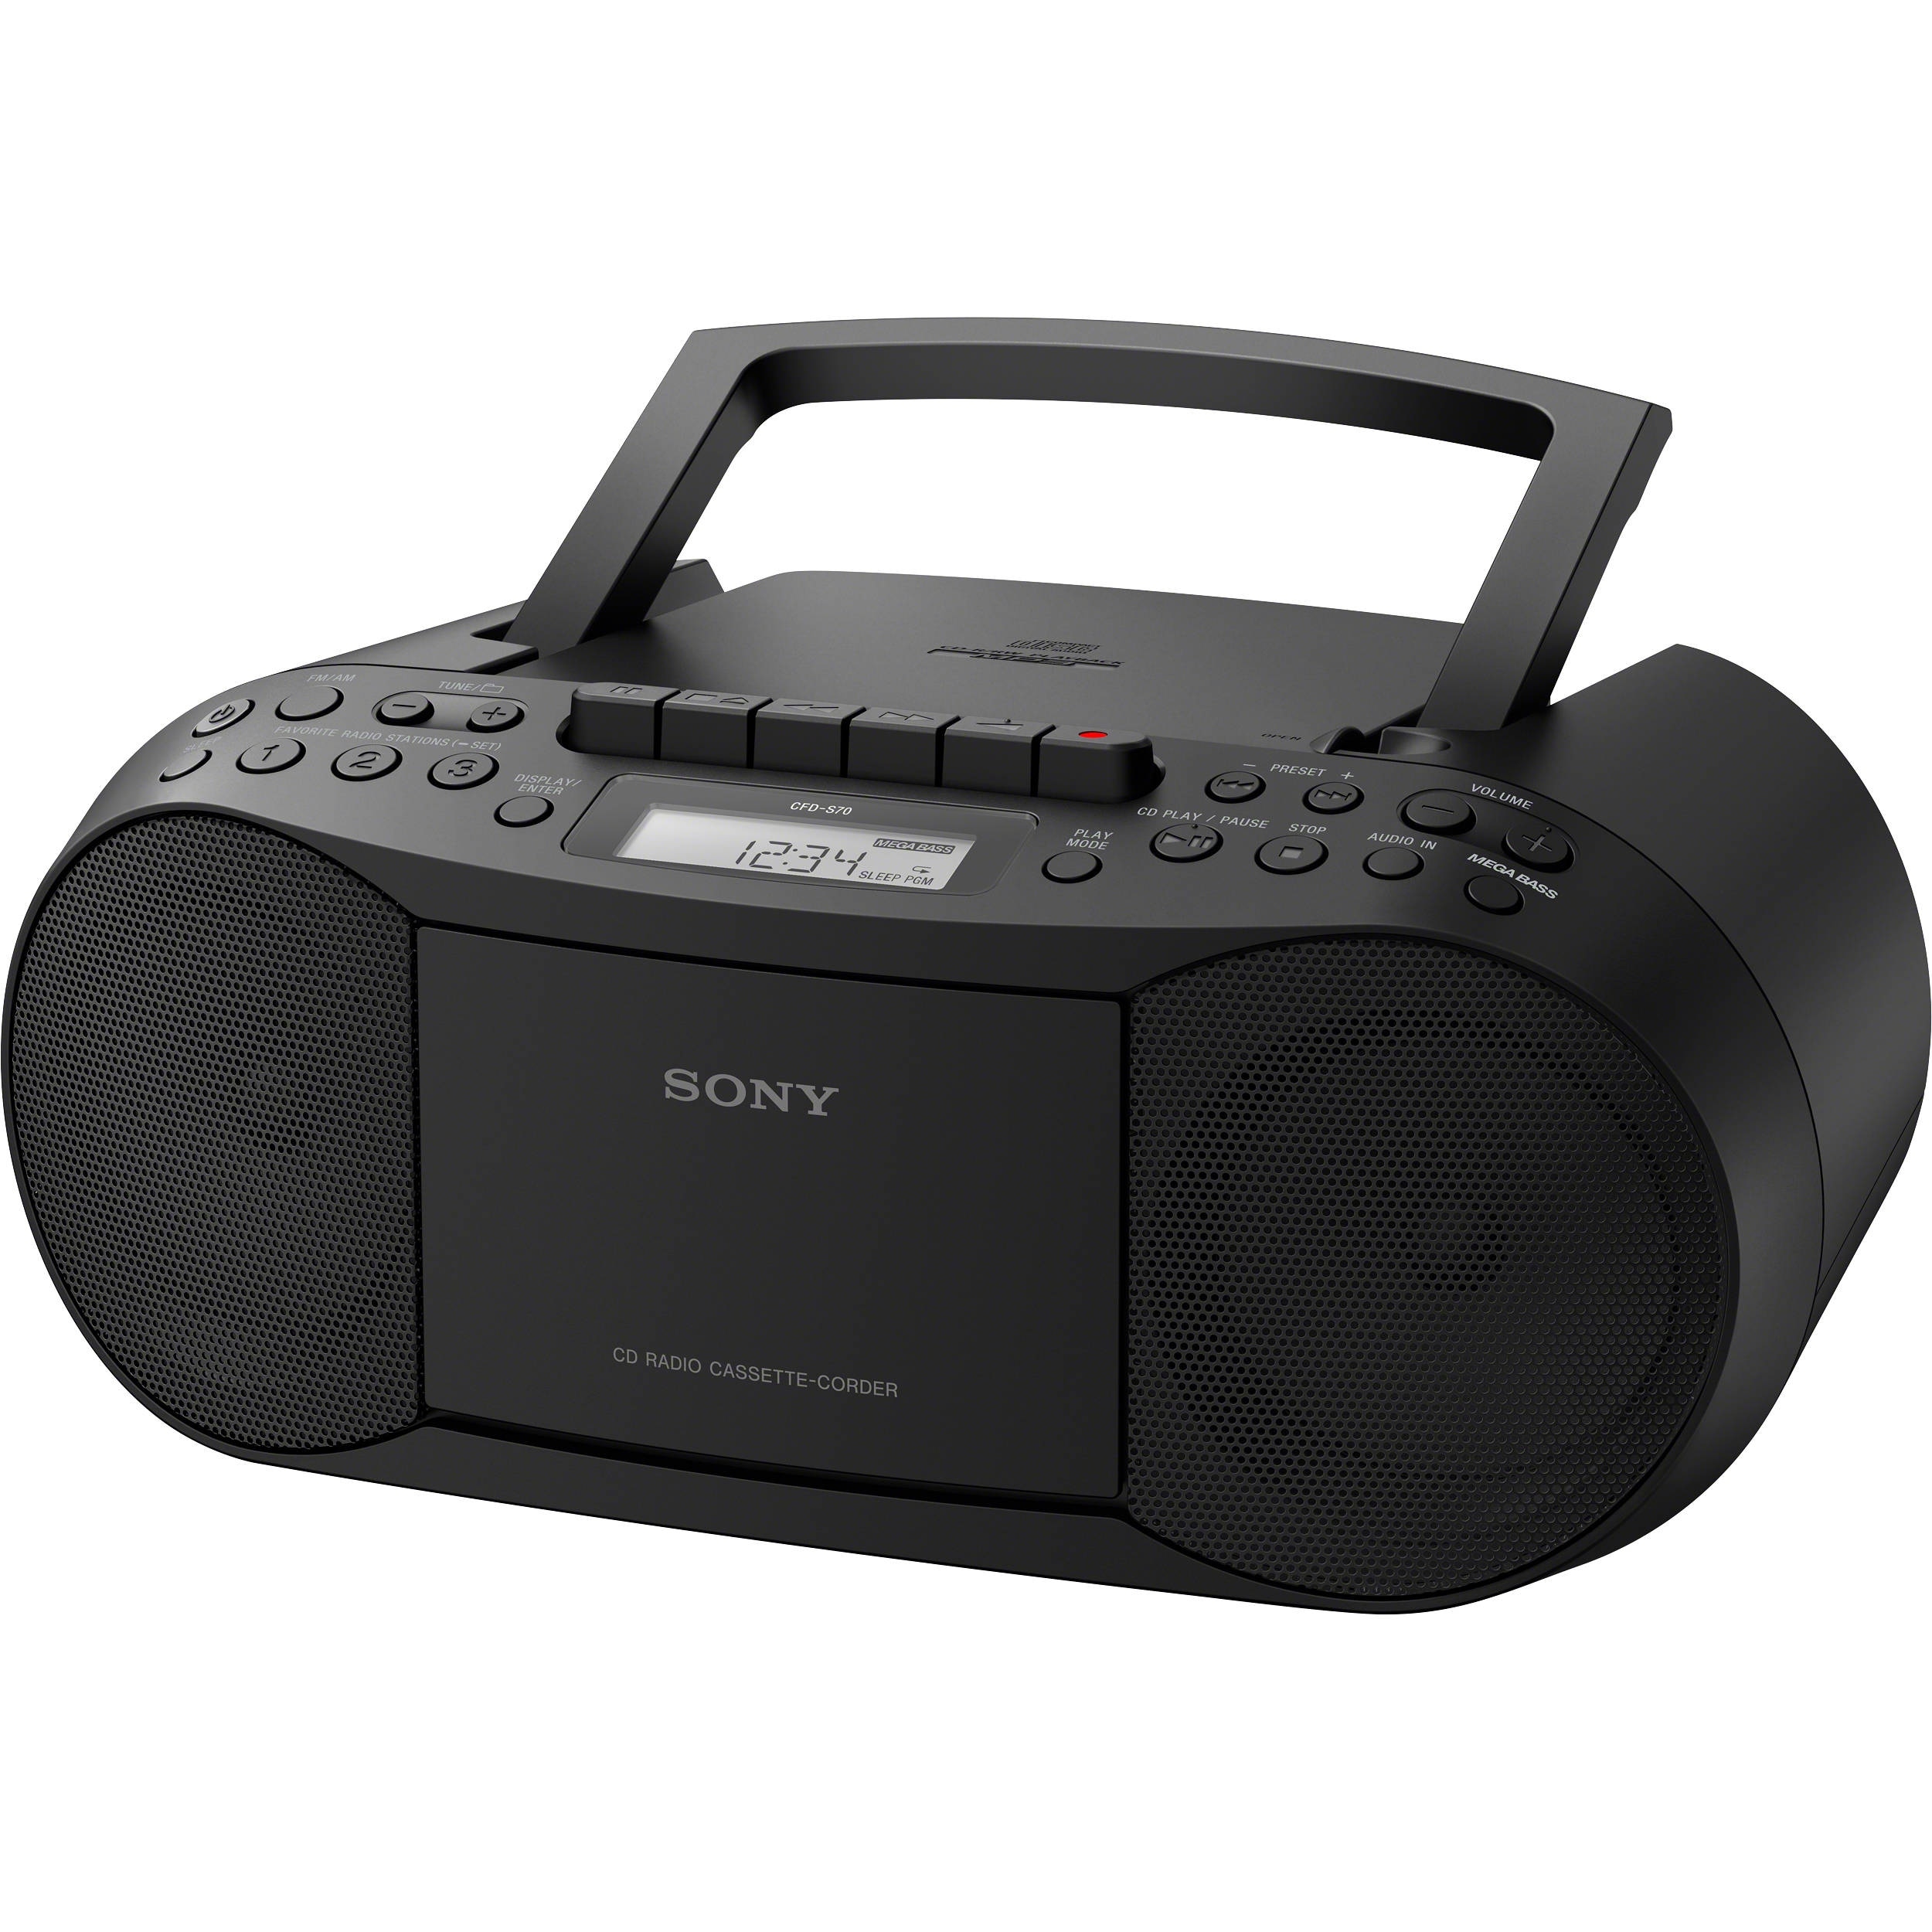 Sony CFDS70-BLK CD/MP3 Cassette Boombox Home Audio...